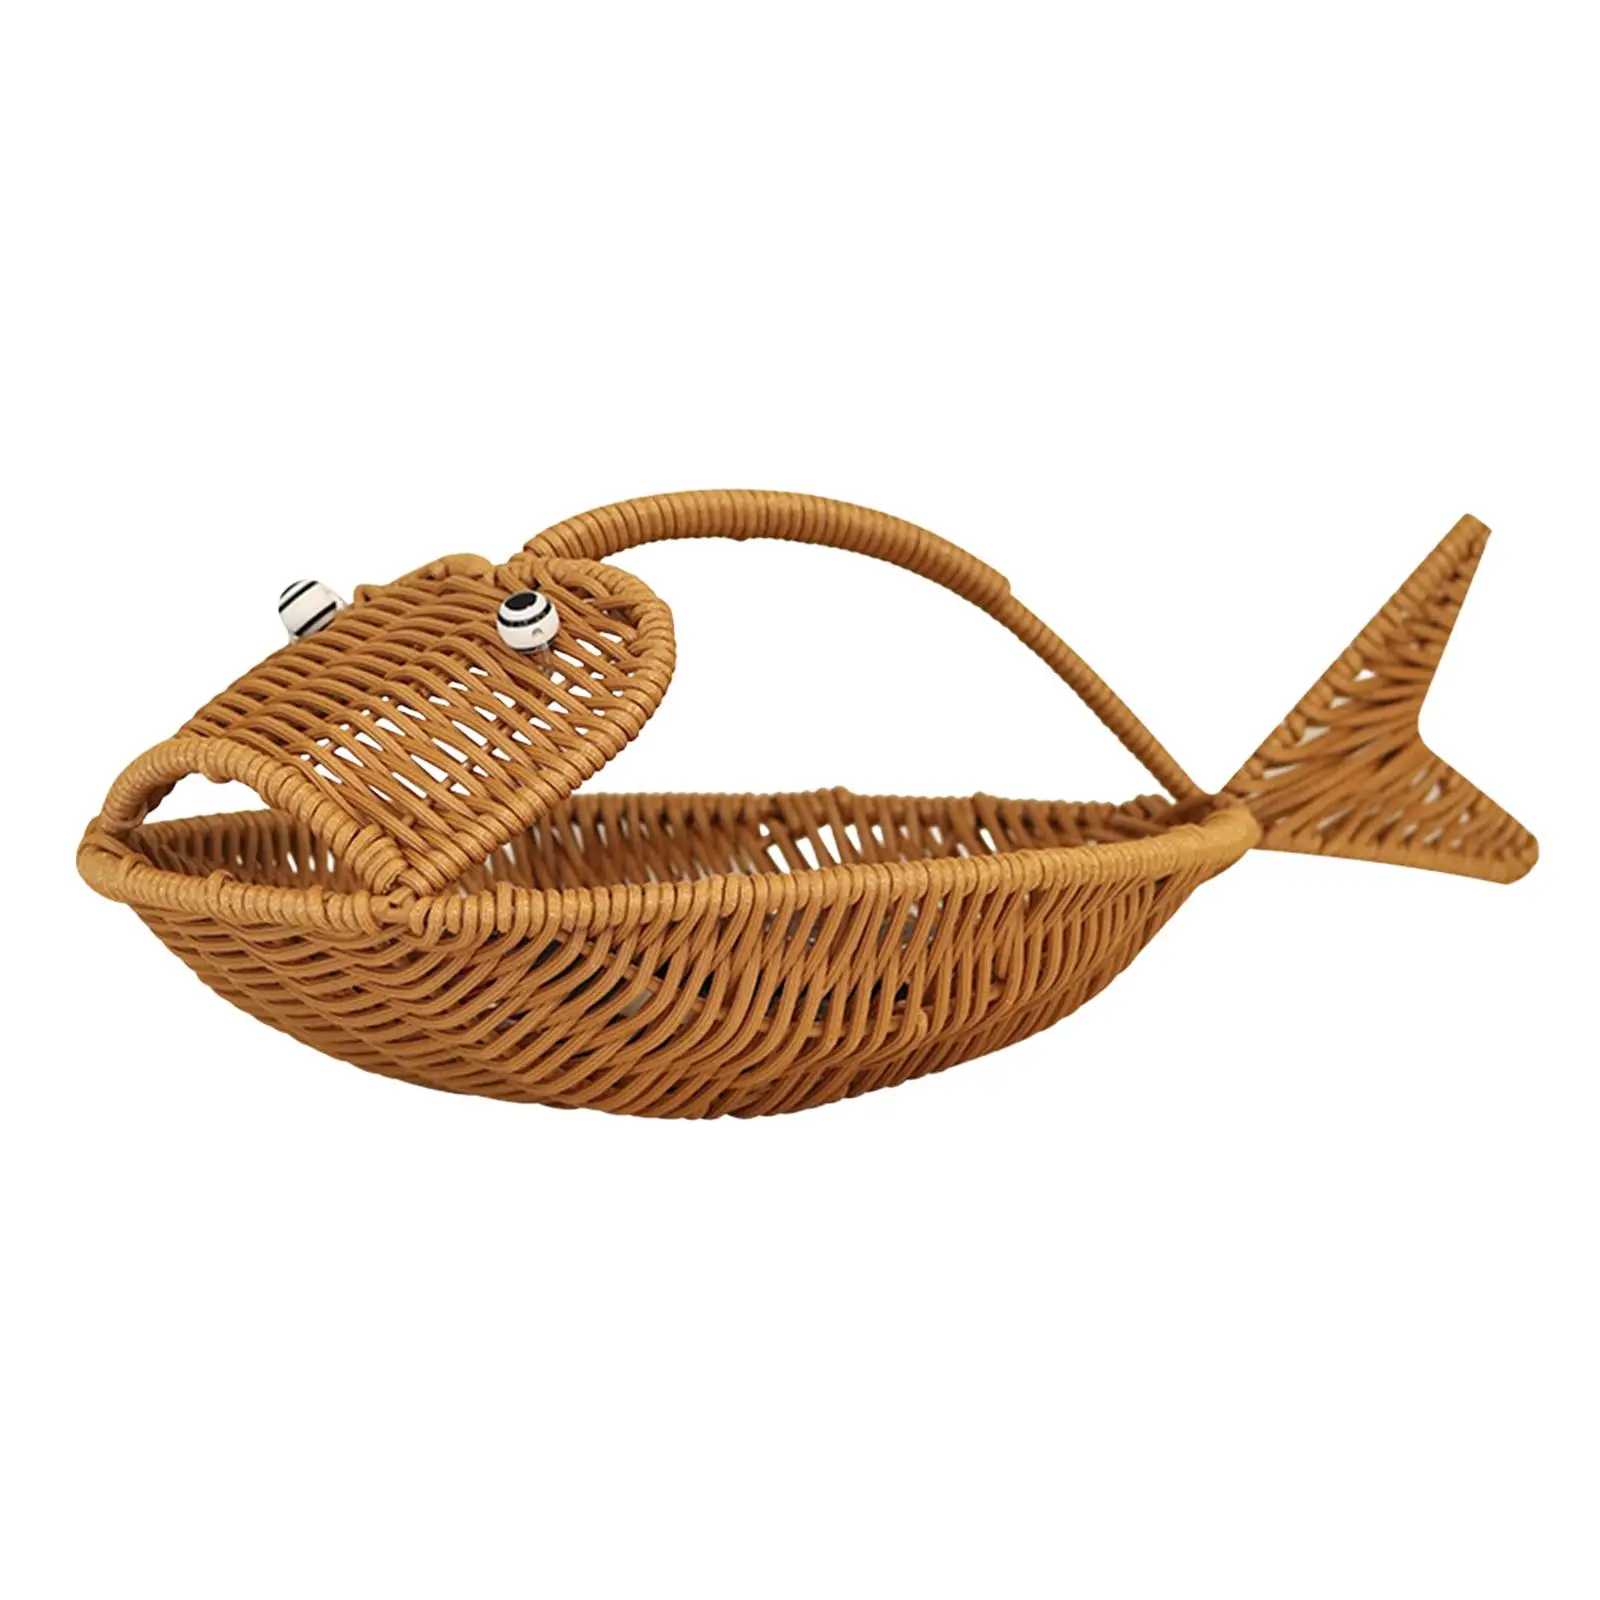 Wicker Vegetable Storage Storage Basket Cute Fish Shape Bread Baking Tray Rattan Bread Baskets for Camping Dining Room Picnic